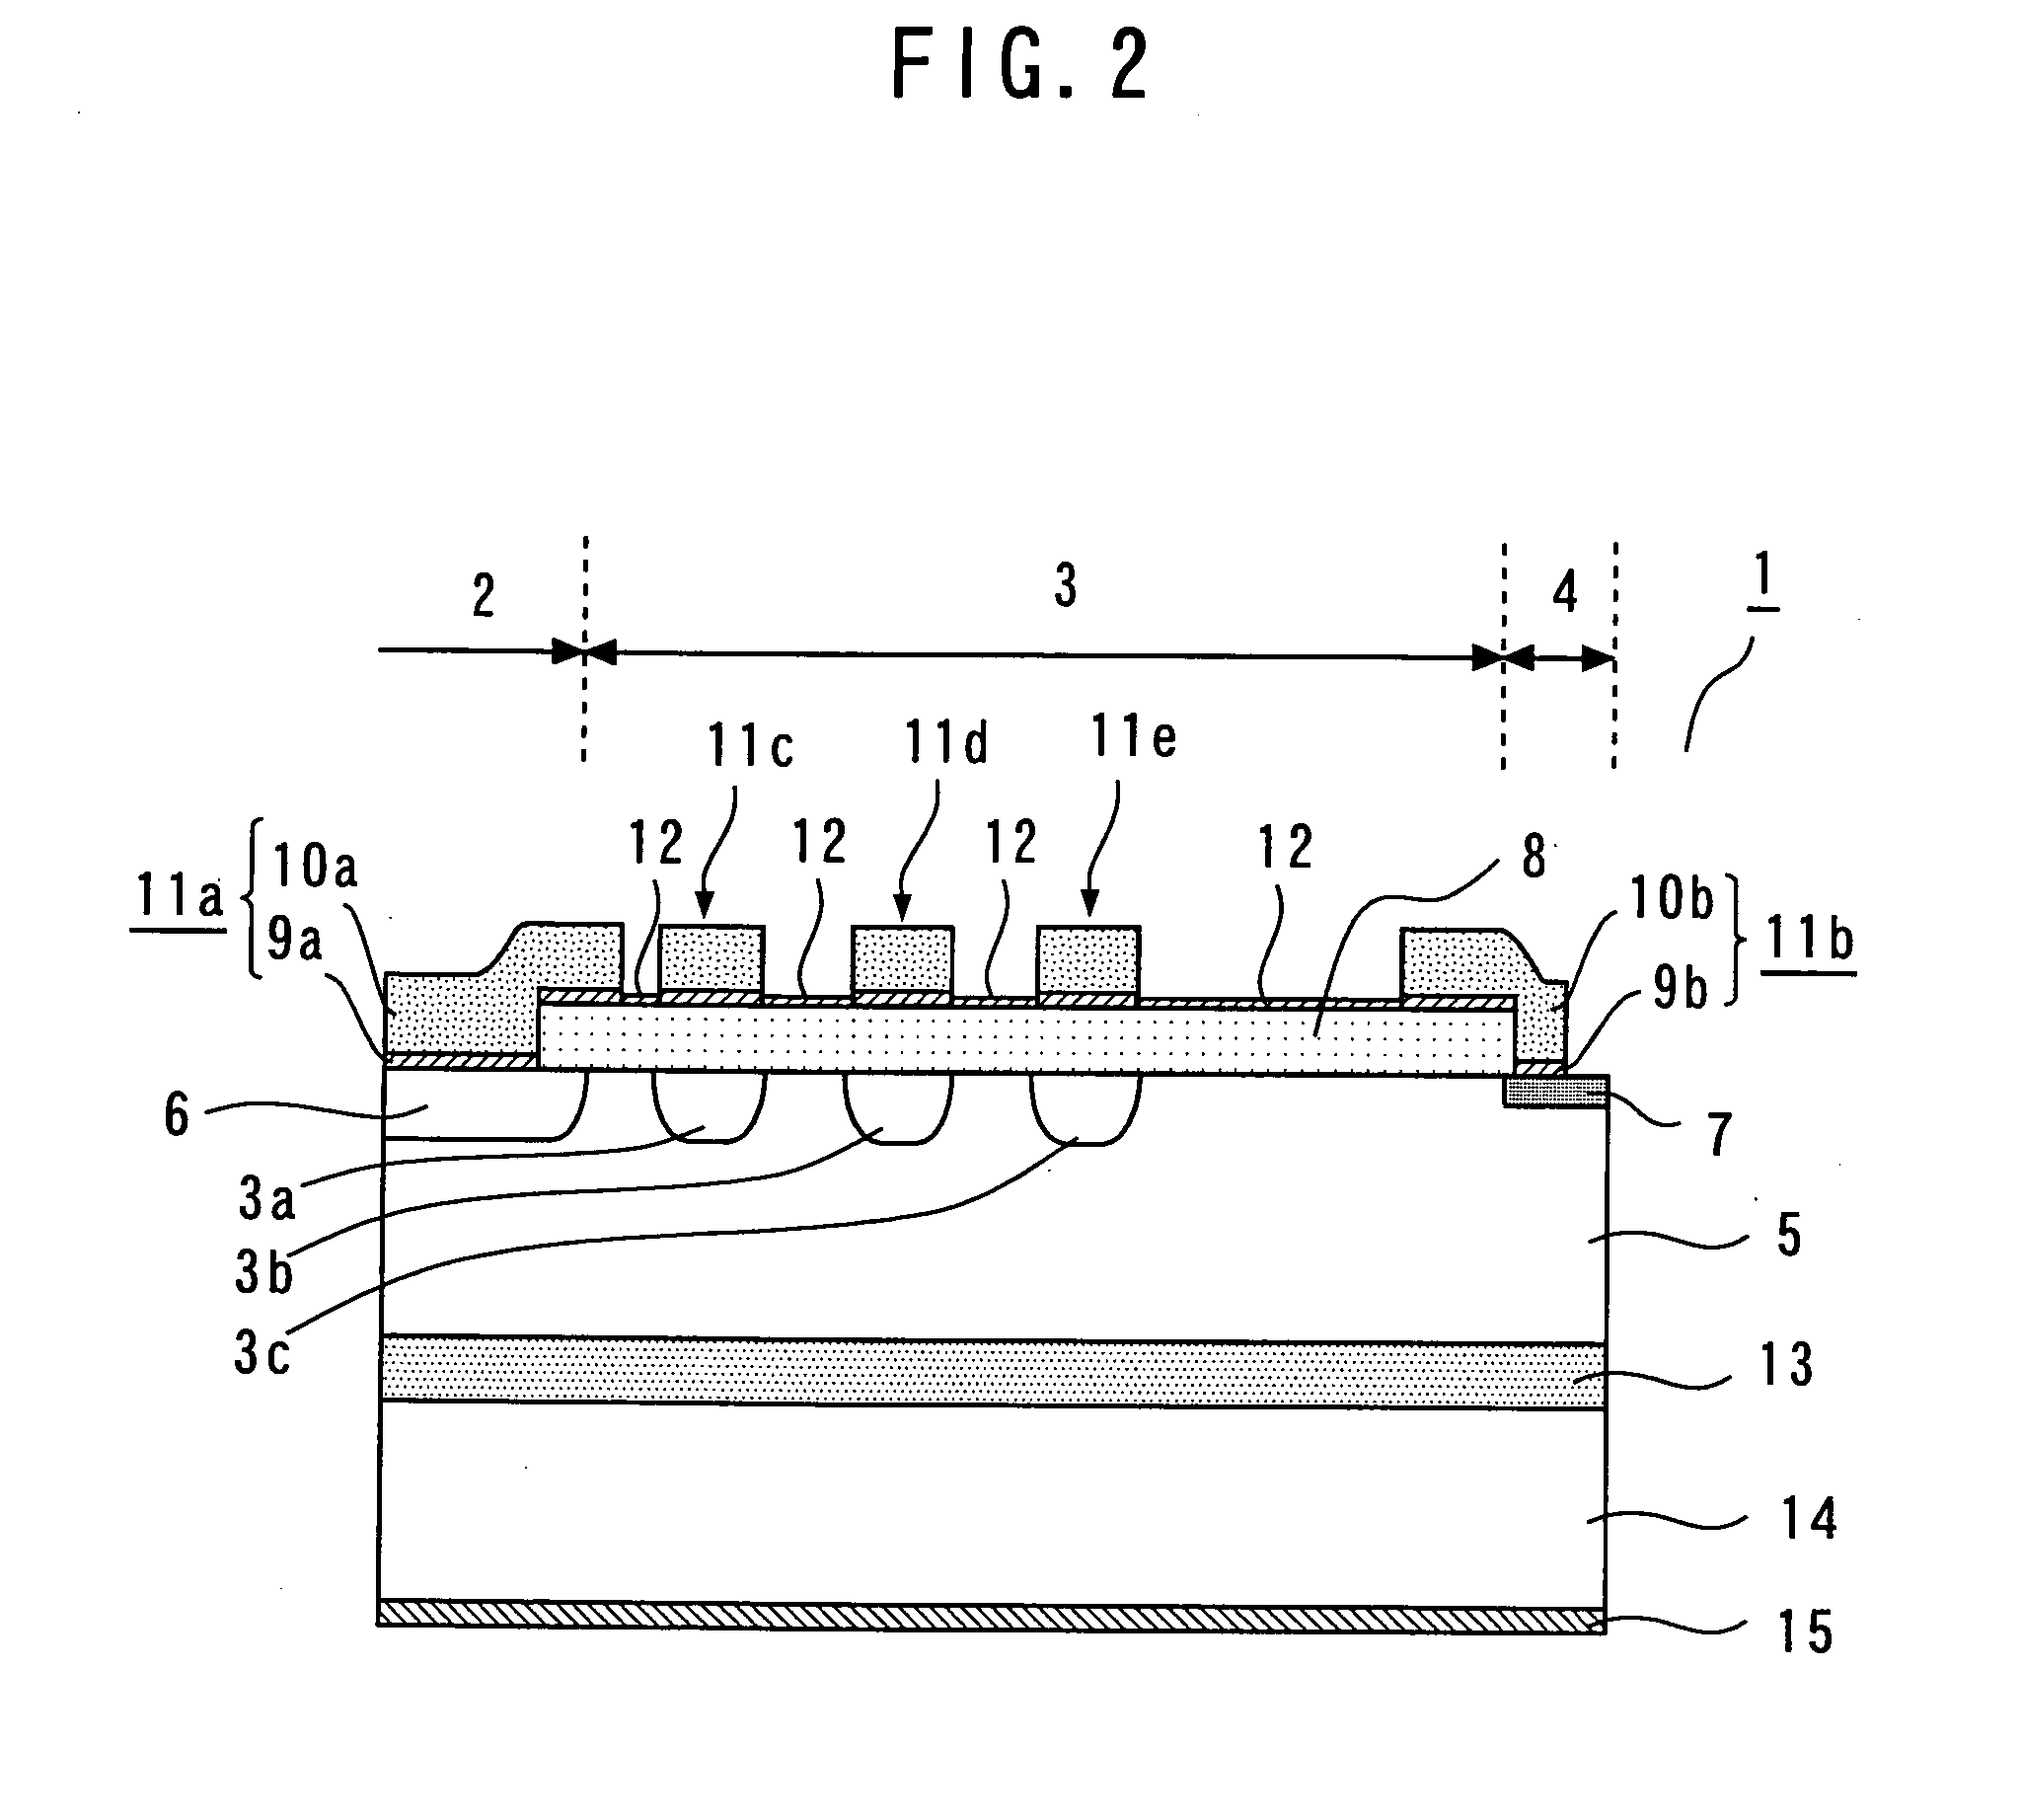 Semiconductor device having an improved structure for high withstand voltage